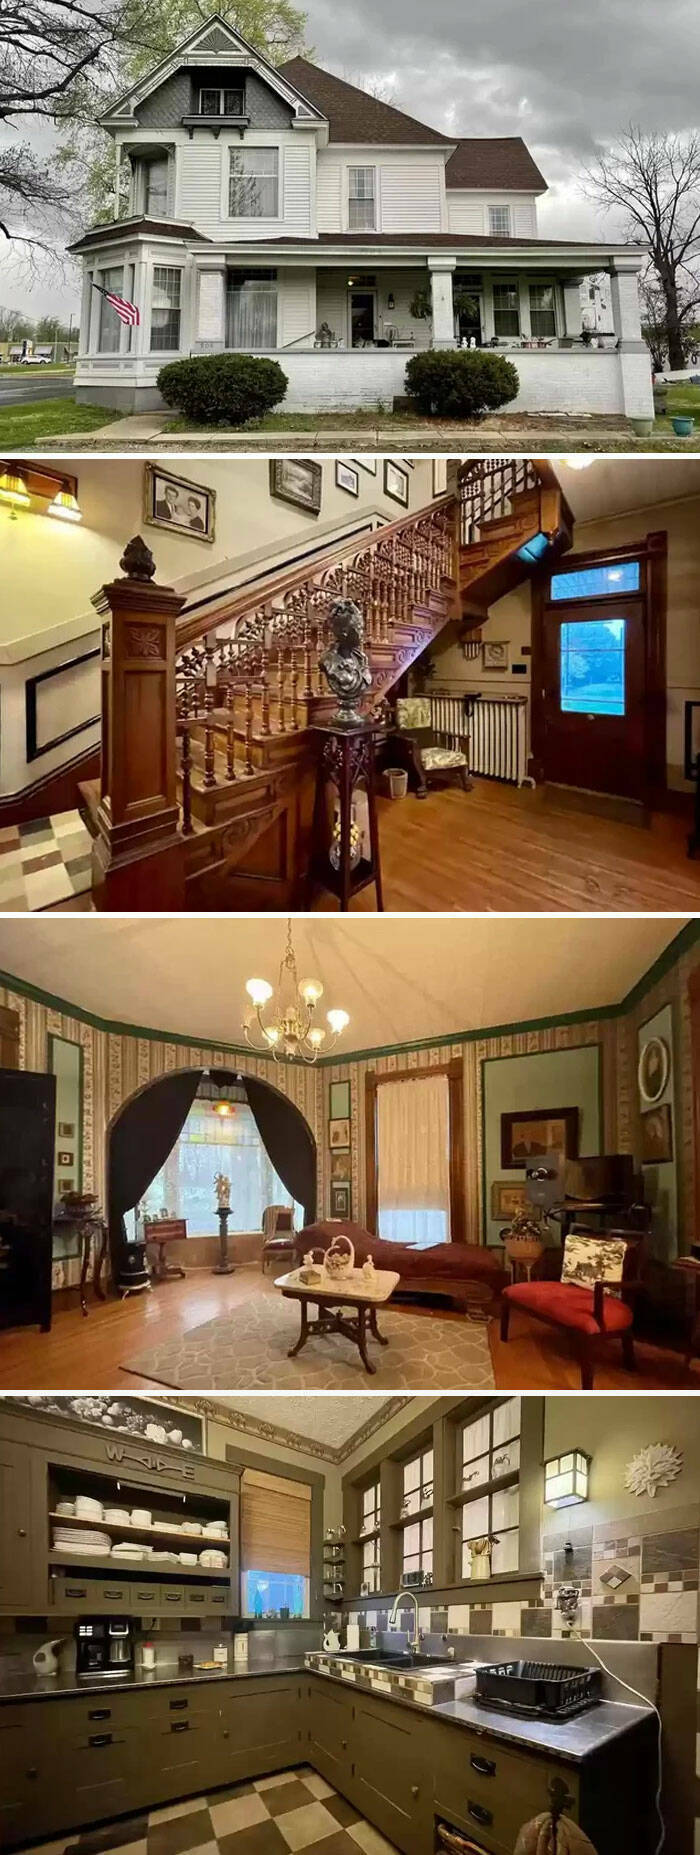 People Share Details About Living In Century Homes